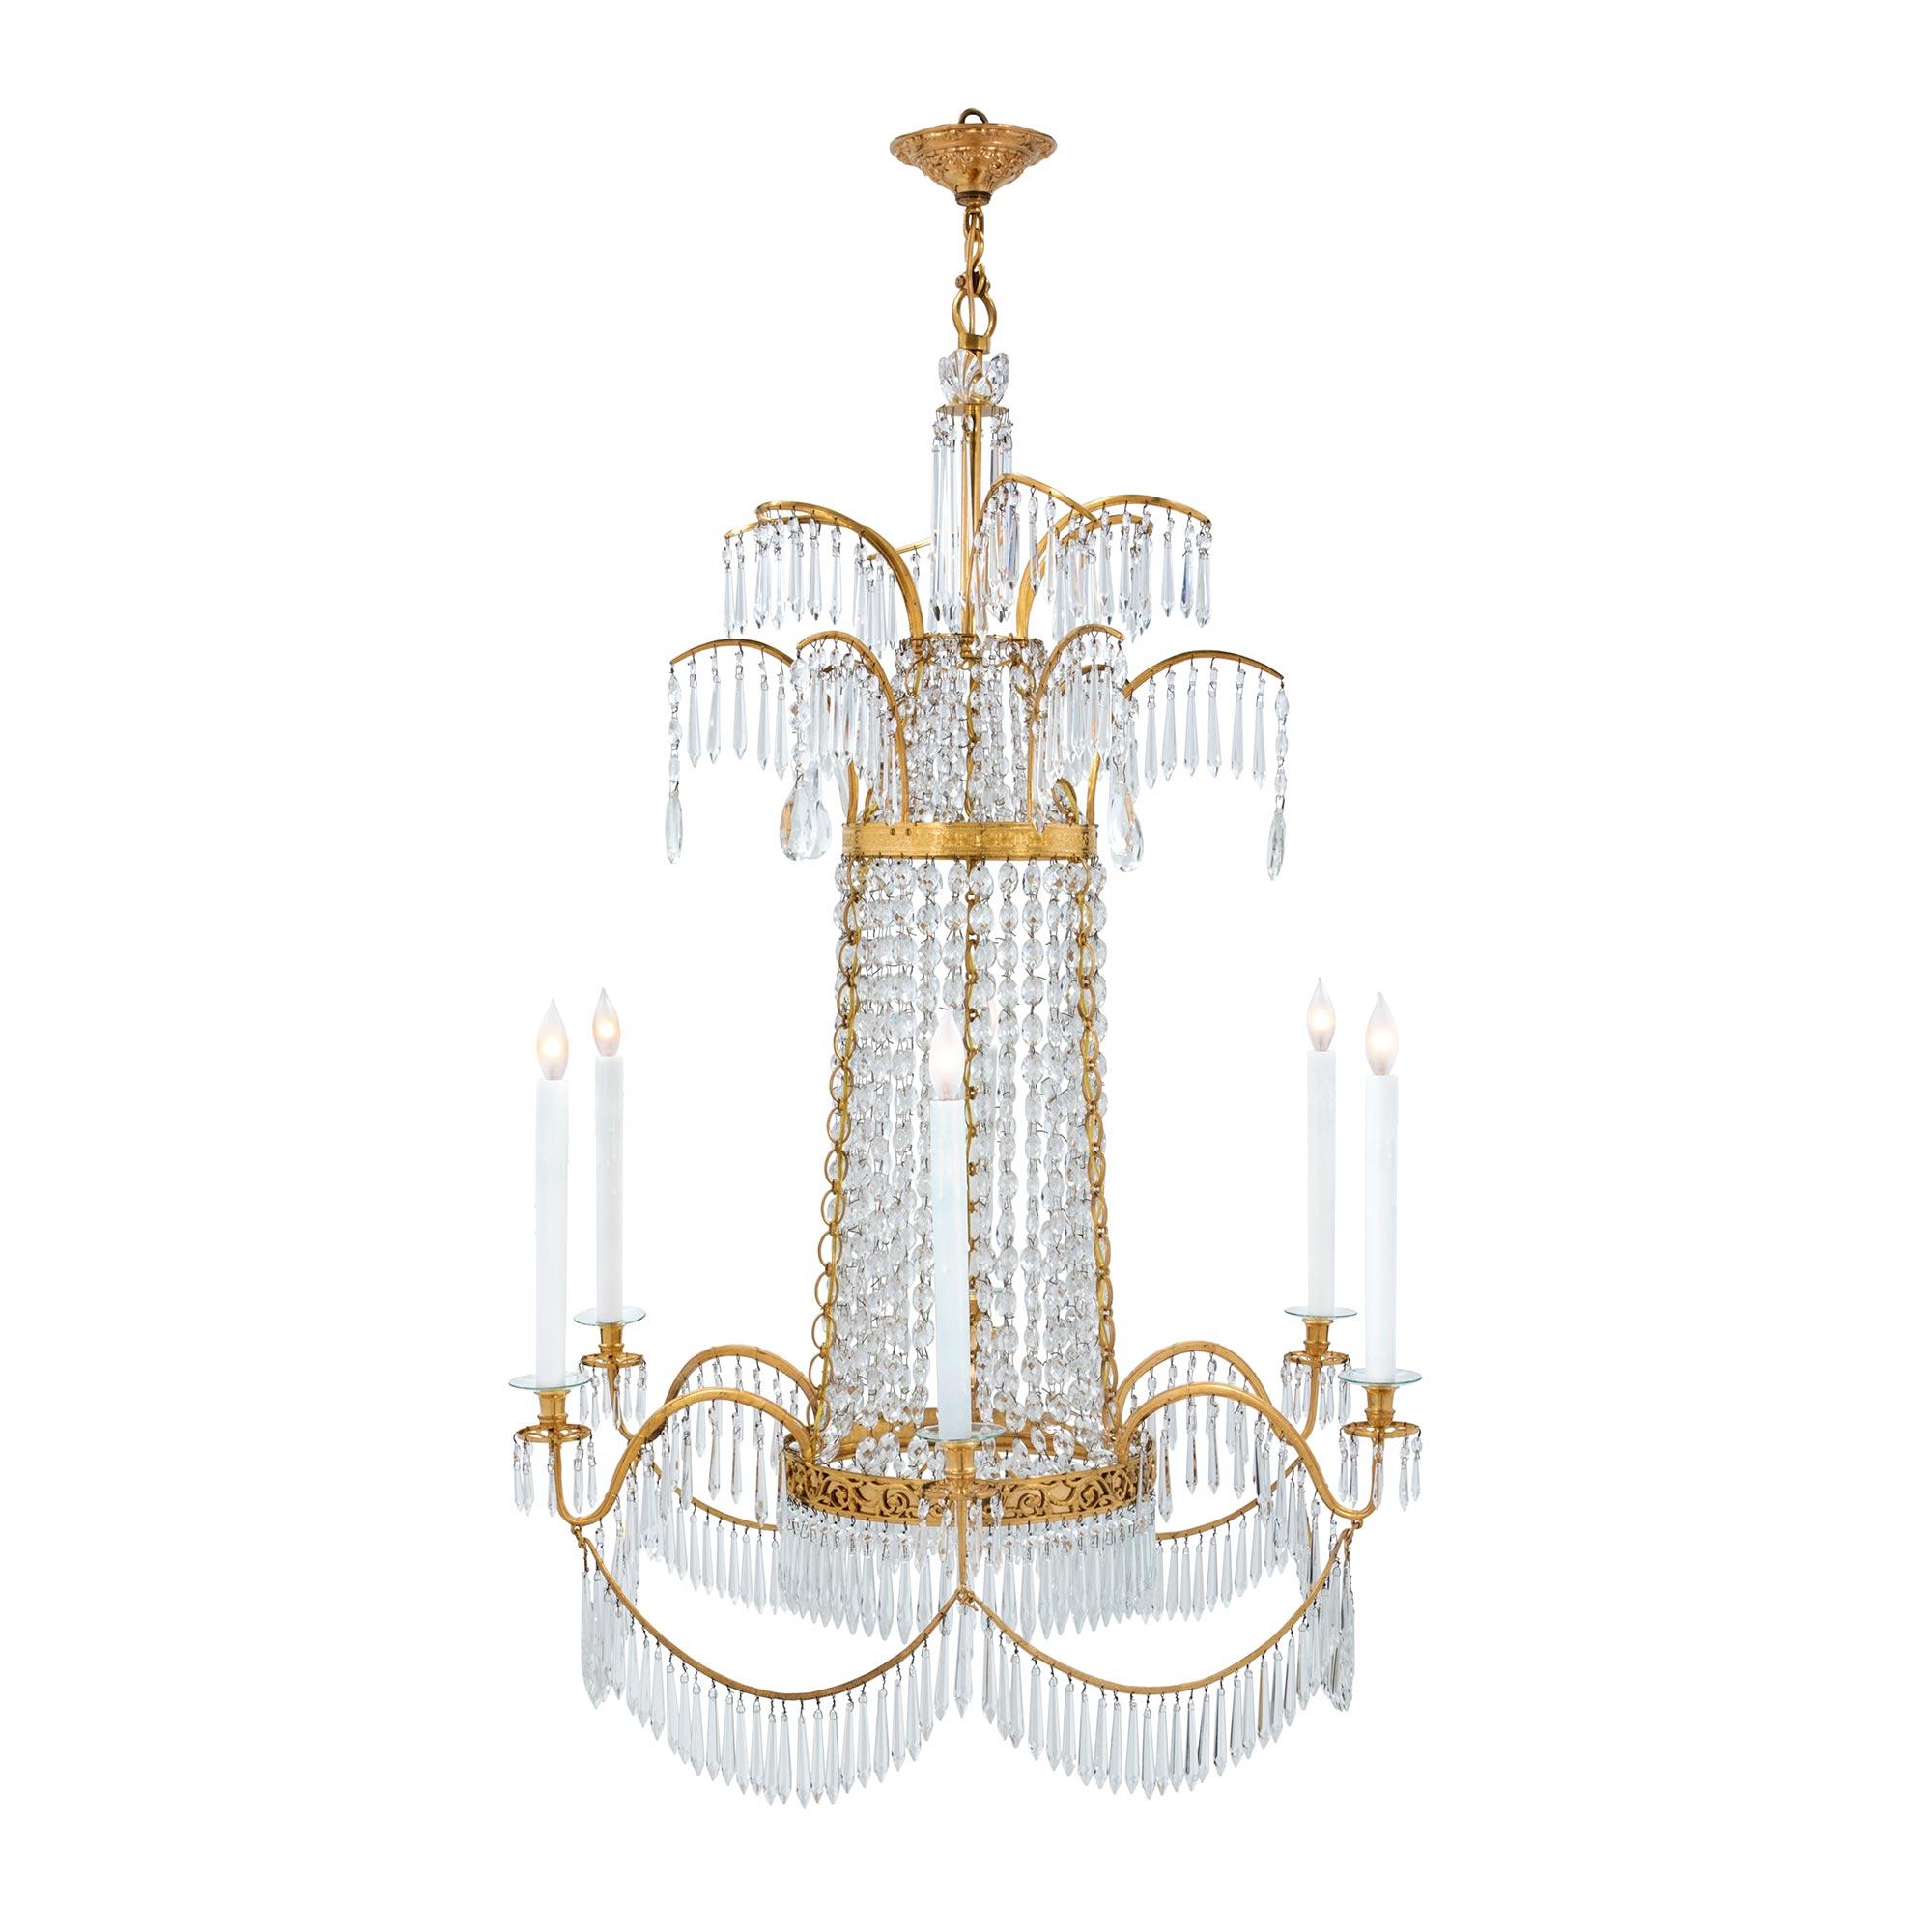 A stunning Russian 19th century Neo-Classical ormolu and crystal six light chandelier. The chandelier is centered by a beautiful bottom circular tier with a richly chased pierced, scrolled and foliate band. The ormolu back plate is adorned in prism